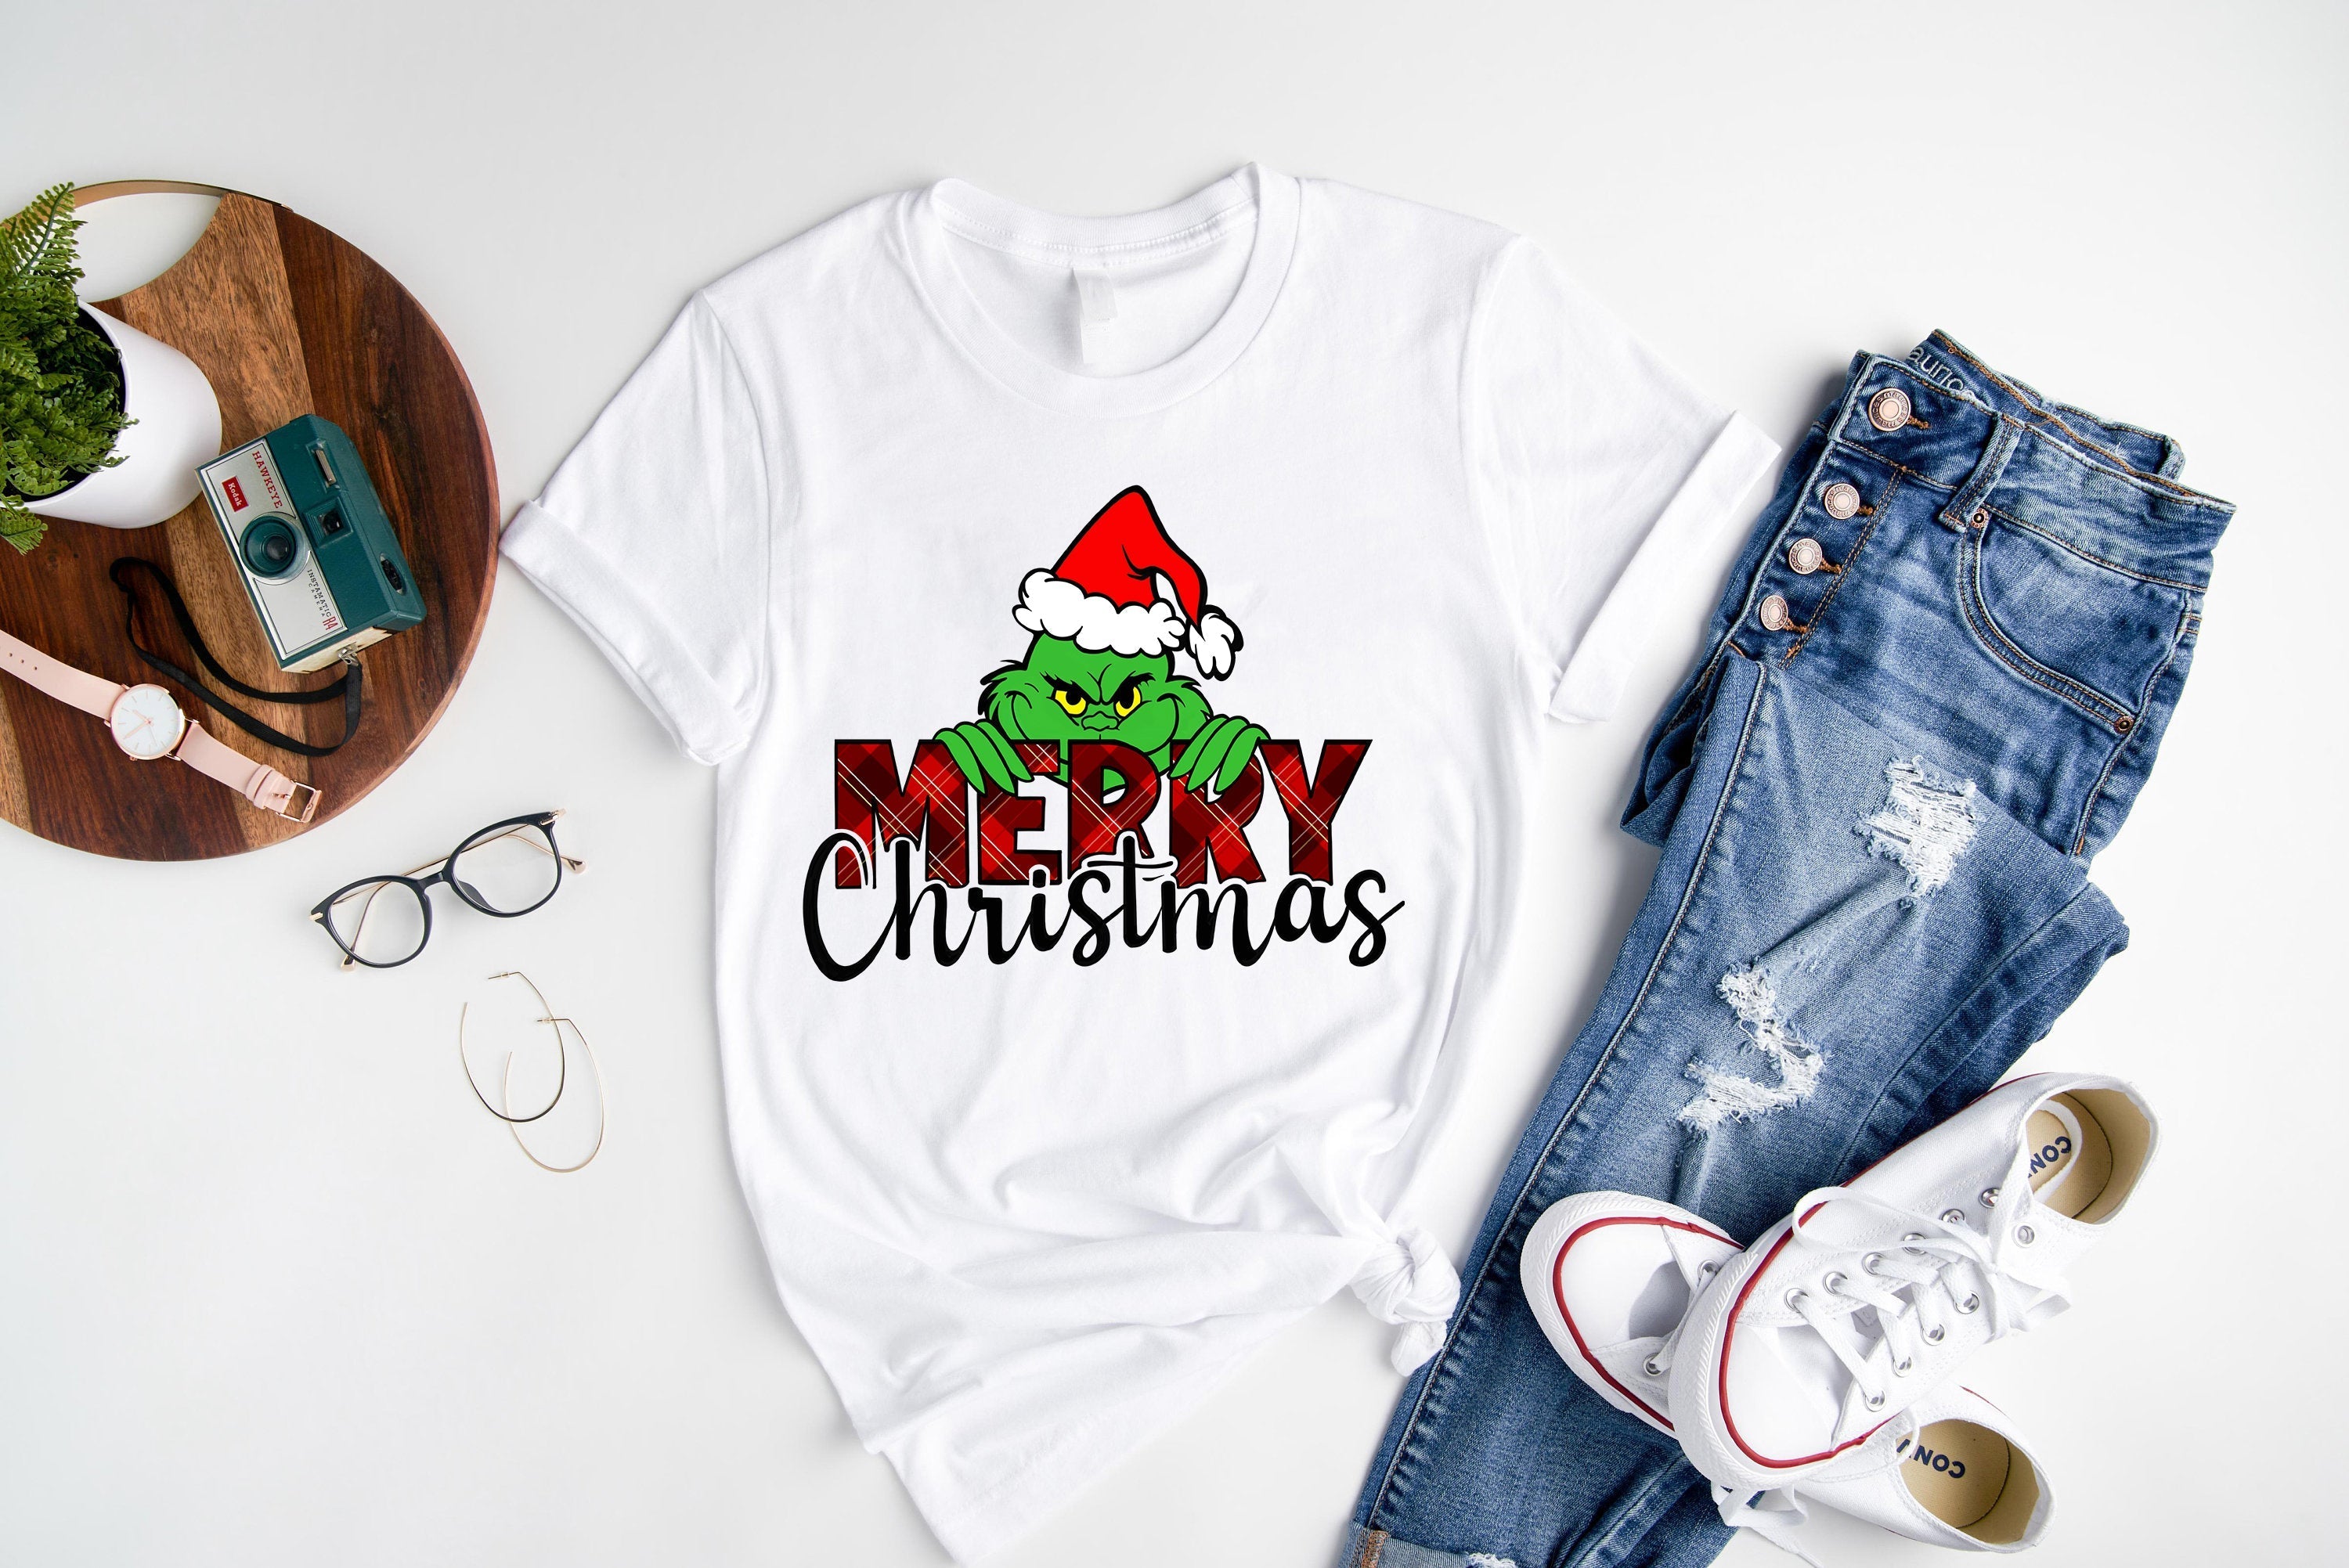 'Merry Chirstmas' Letter Pattern Family Christmas Matching Pajamas Tops Cute White Short Sleeve T-shirts With Dog Bandana